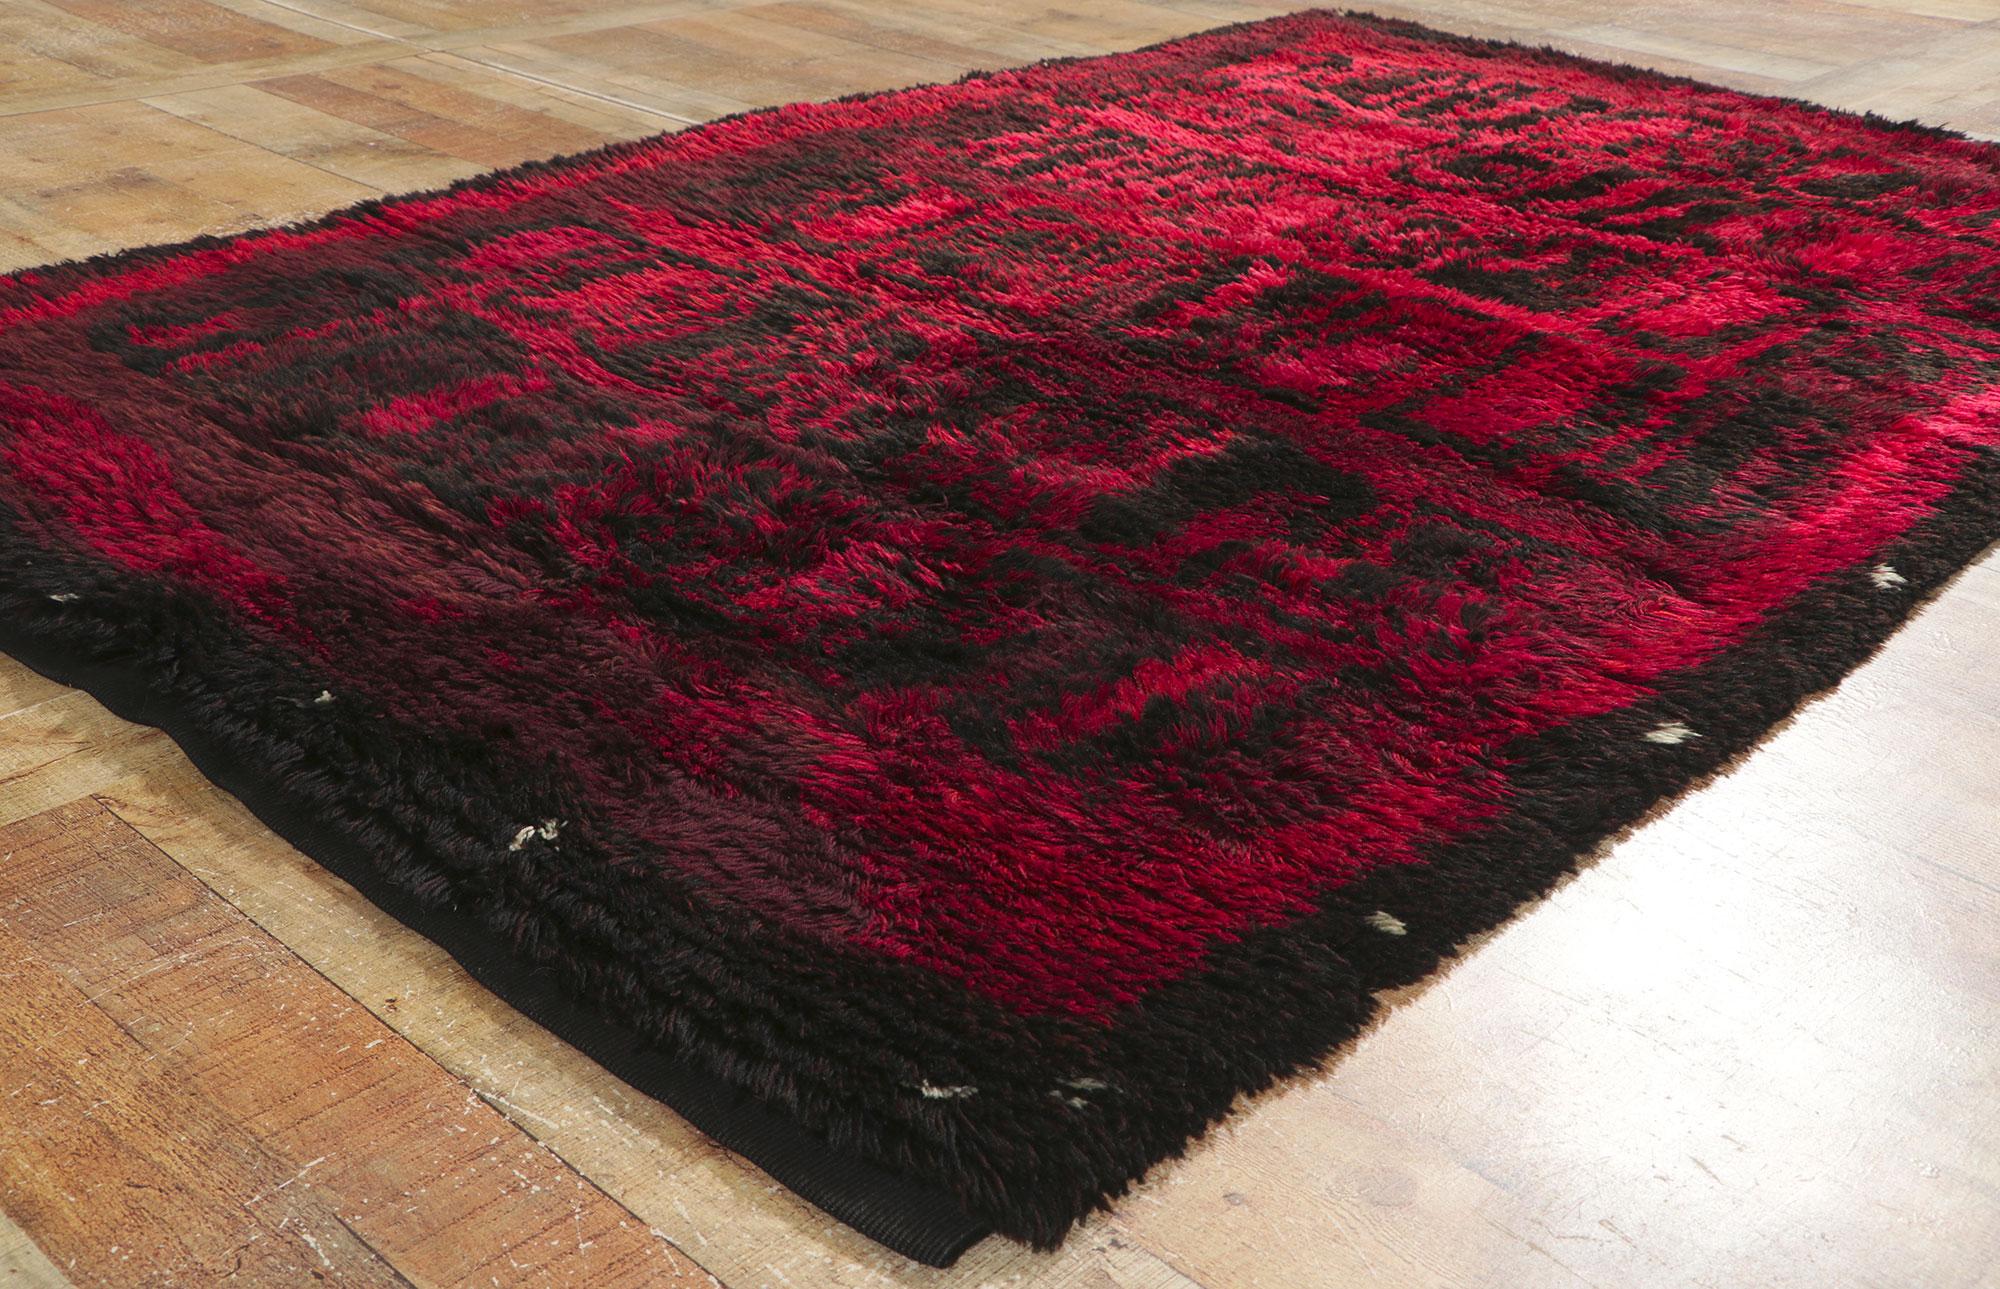 Wool Signed 1963 Kirsti Ilvessalo Finnish Ryijy Carpet, Punainen Syksy Red Autumn For Sale